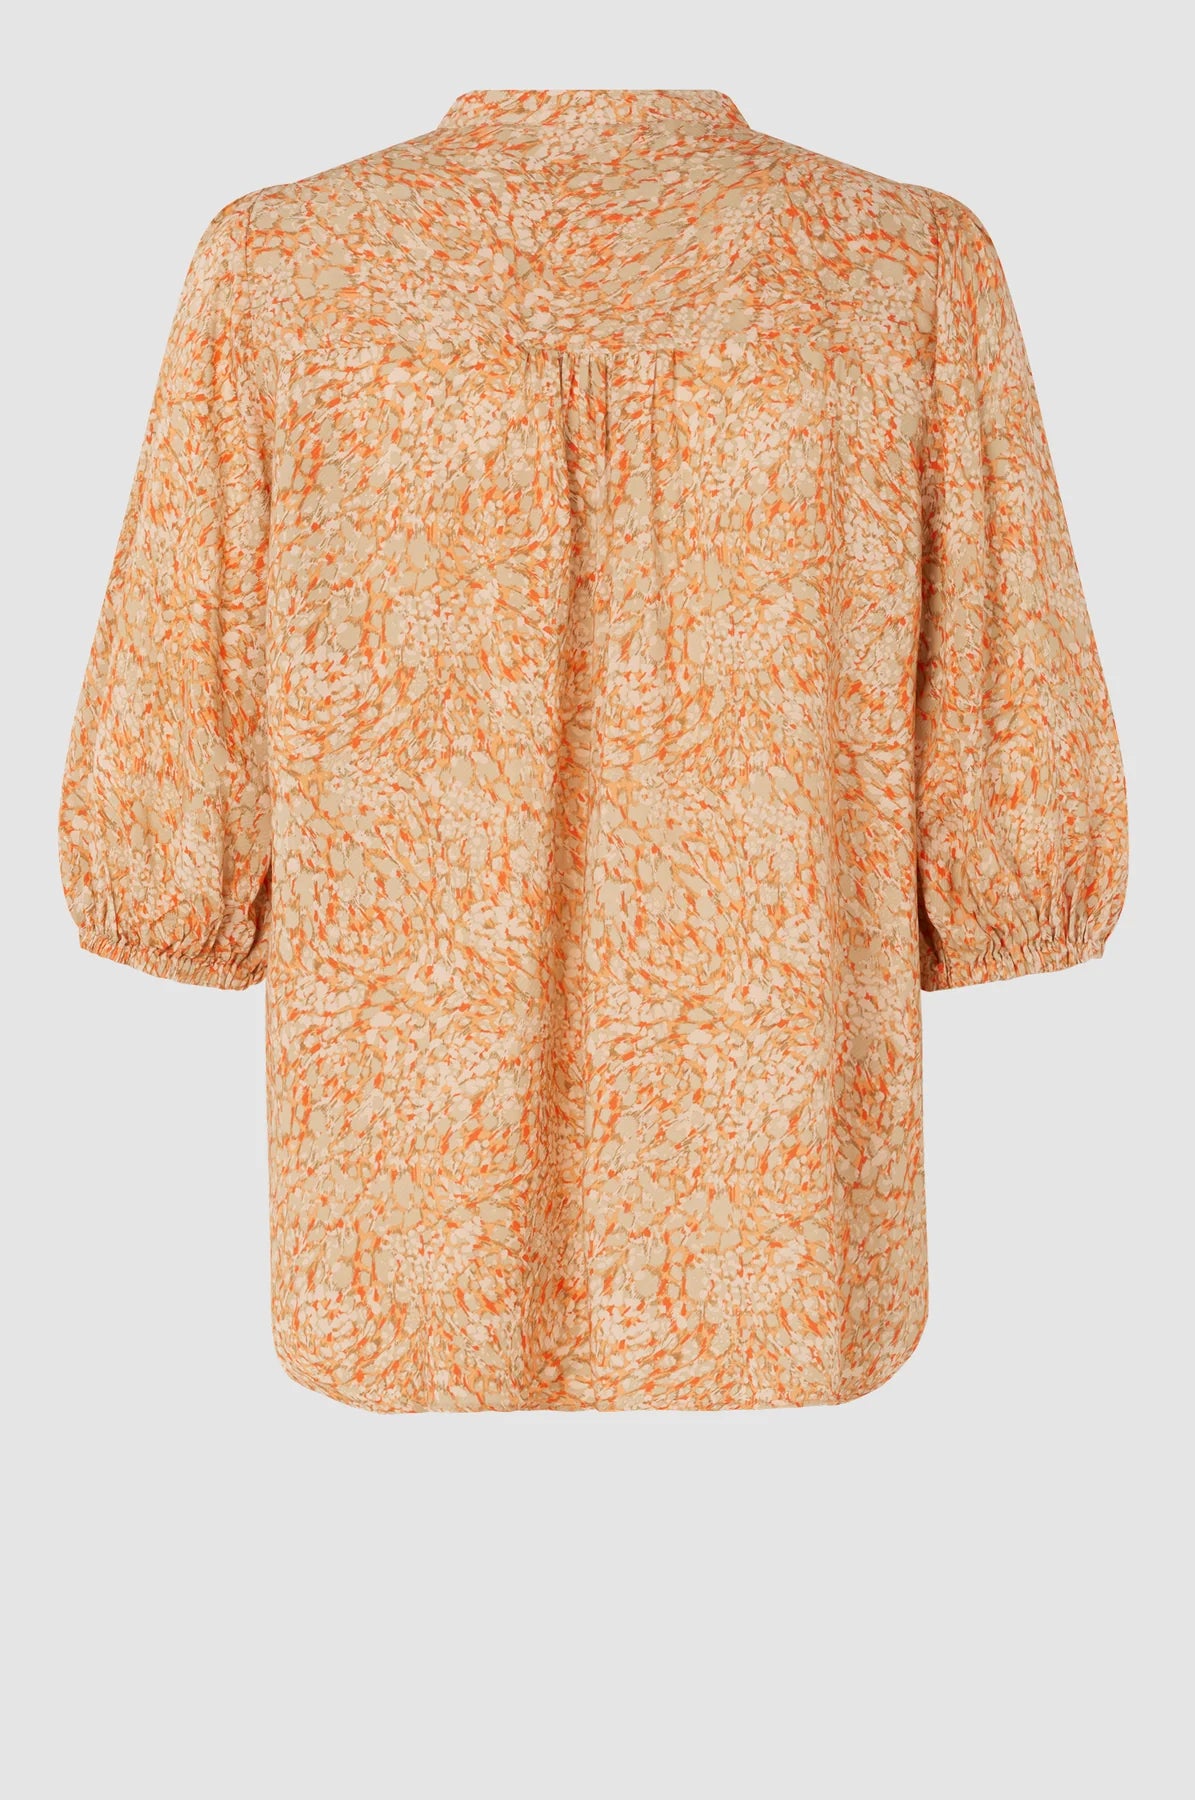 Peach and orange elbow length sleeved top with full length covered placket and elasticated cuffs